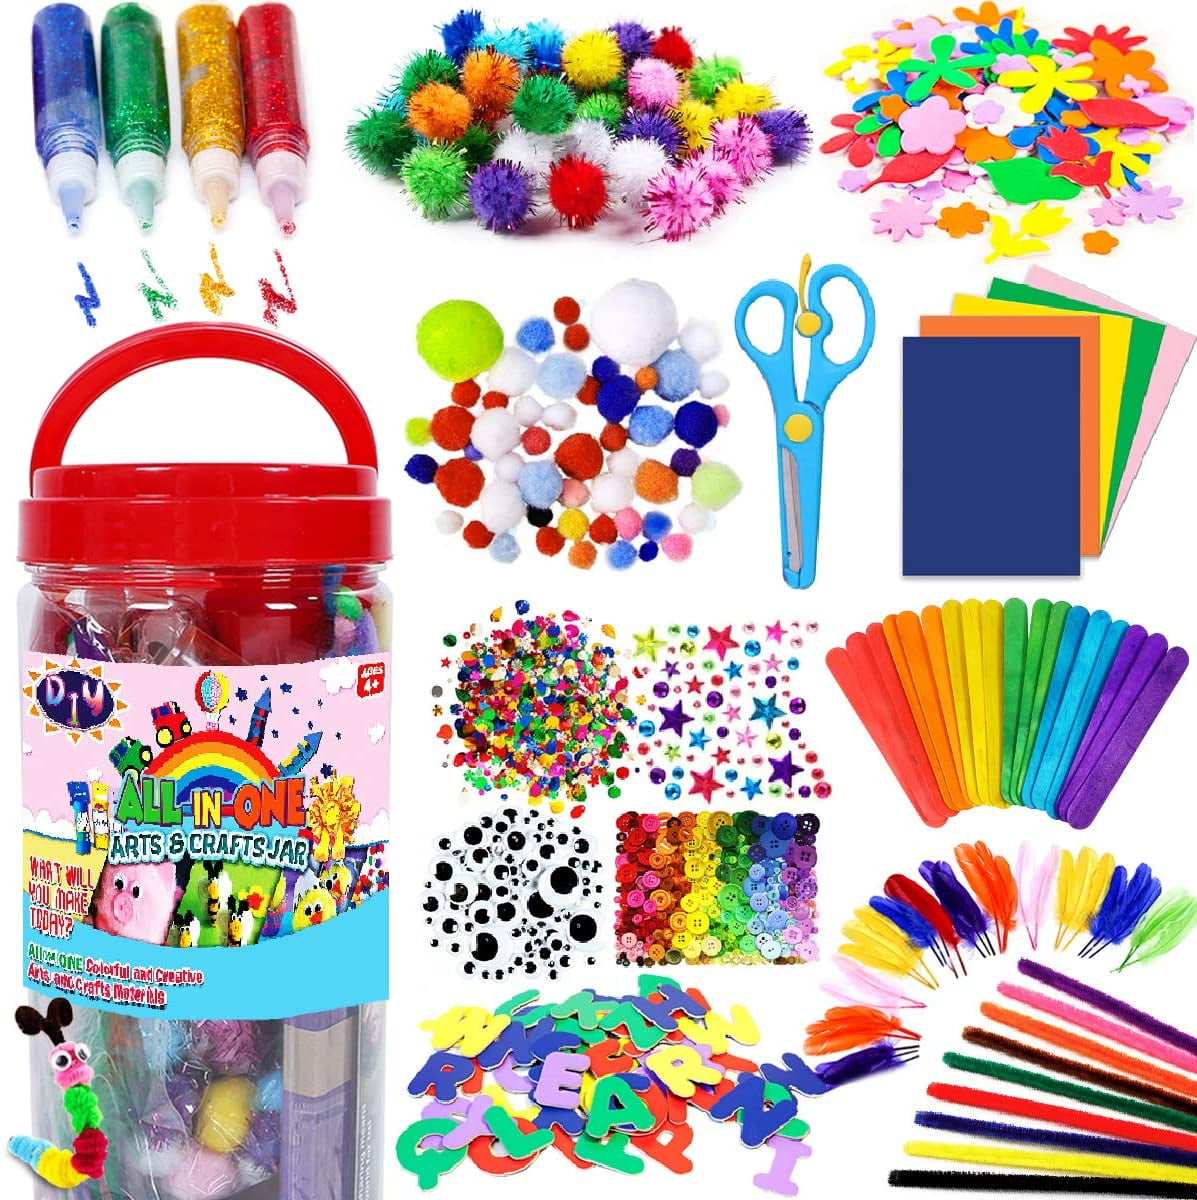 Pompoms Yesland Kids Art Supplies Jar Pipe Cleaners for Preschool Home Project 770 Pcs Arts and Crafts Supplies for Kids Safety Scissors Popsicle Sticks Glue All in One DIY Craft Jar Kit 